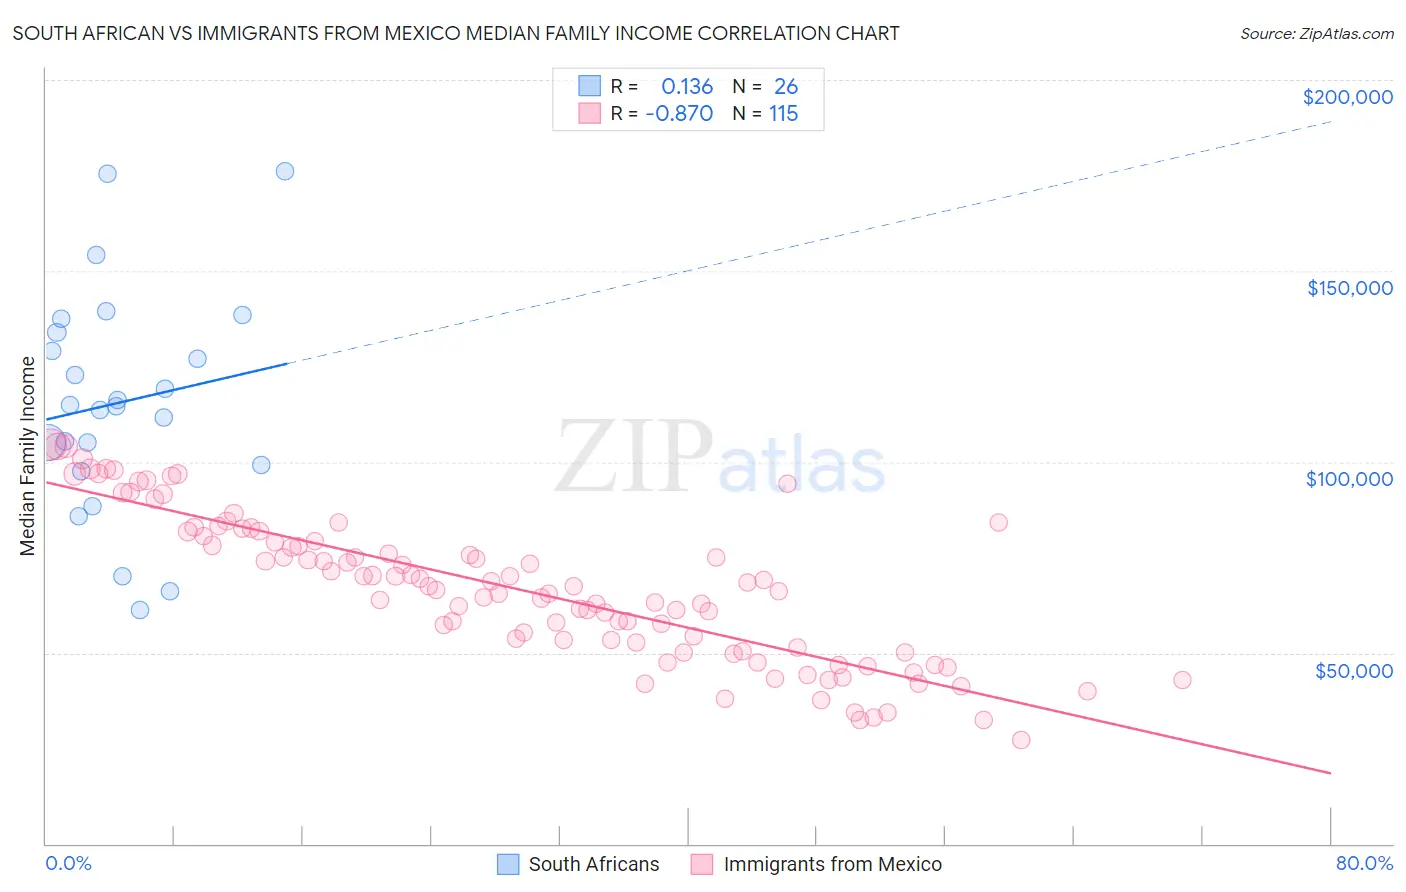 South African vs Immigrants from Mexico Median Family Income